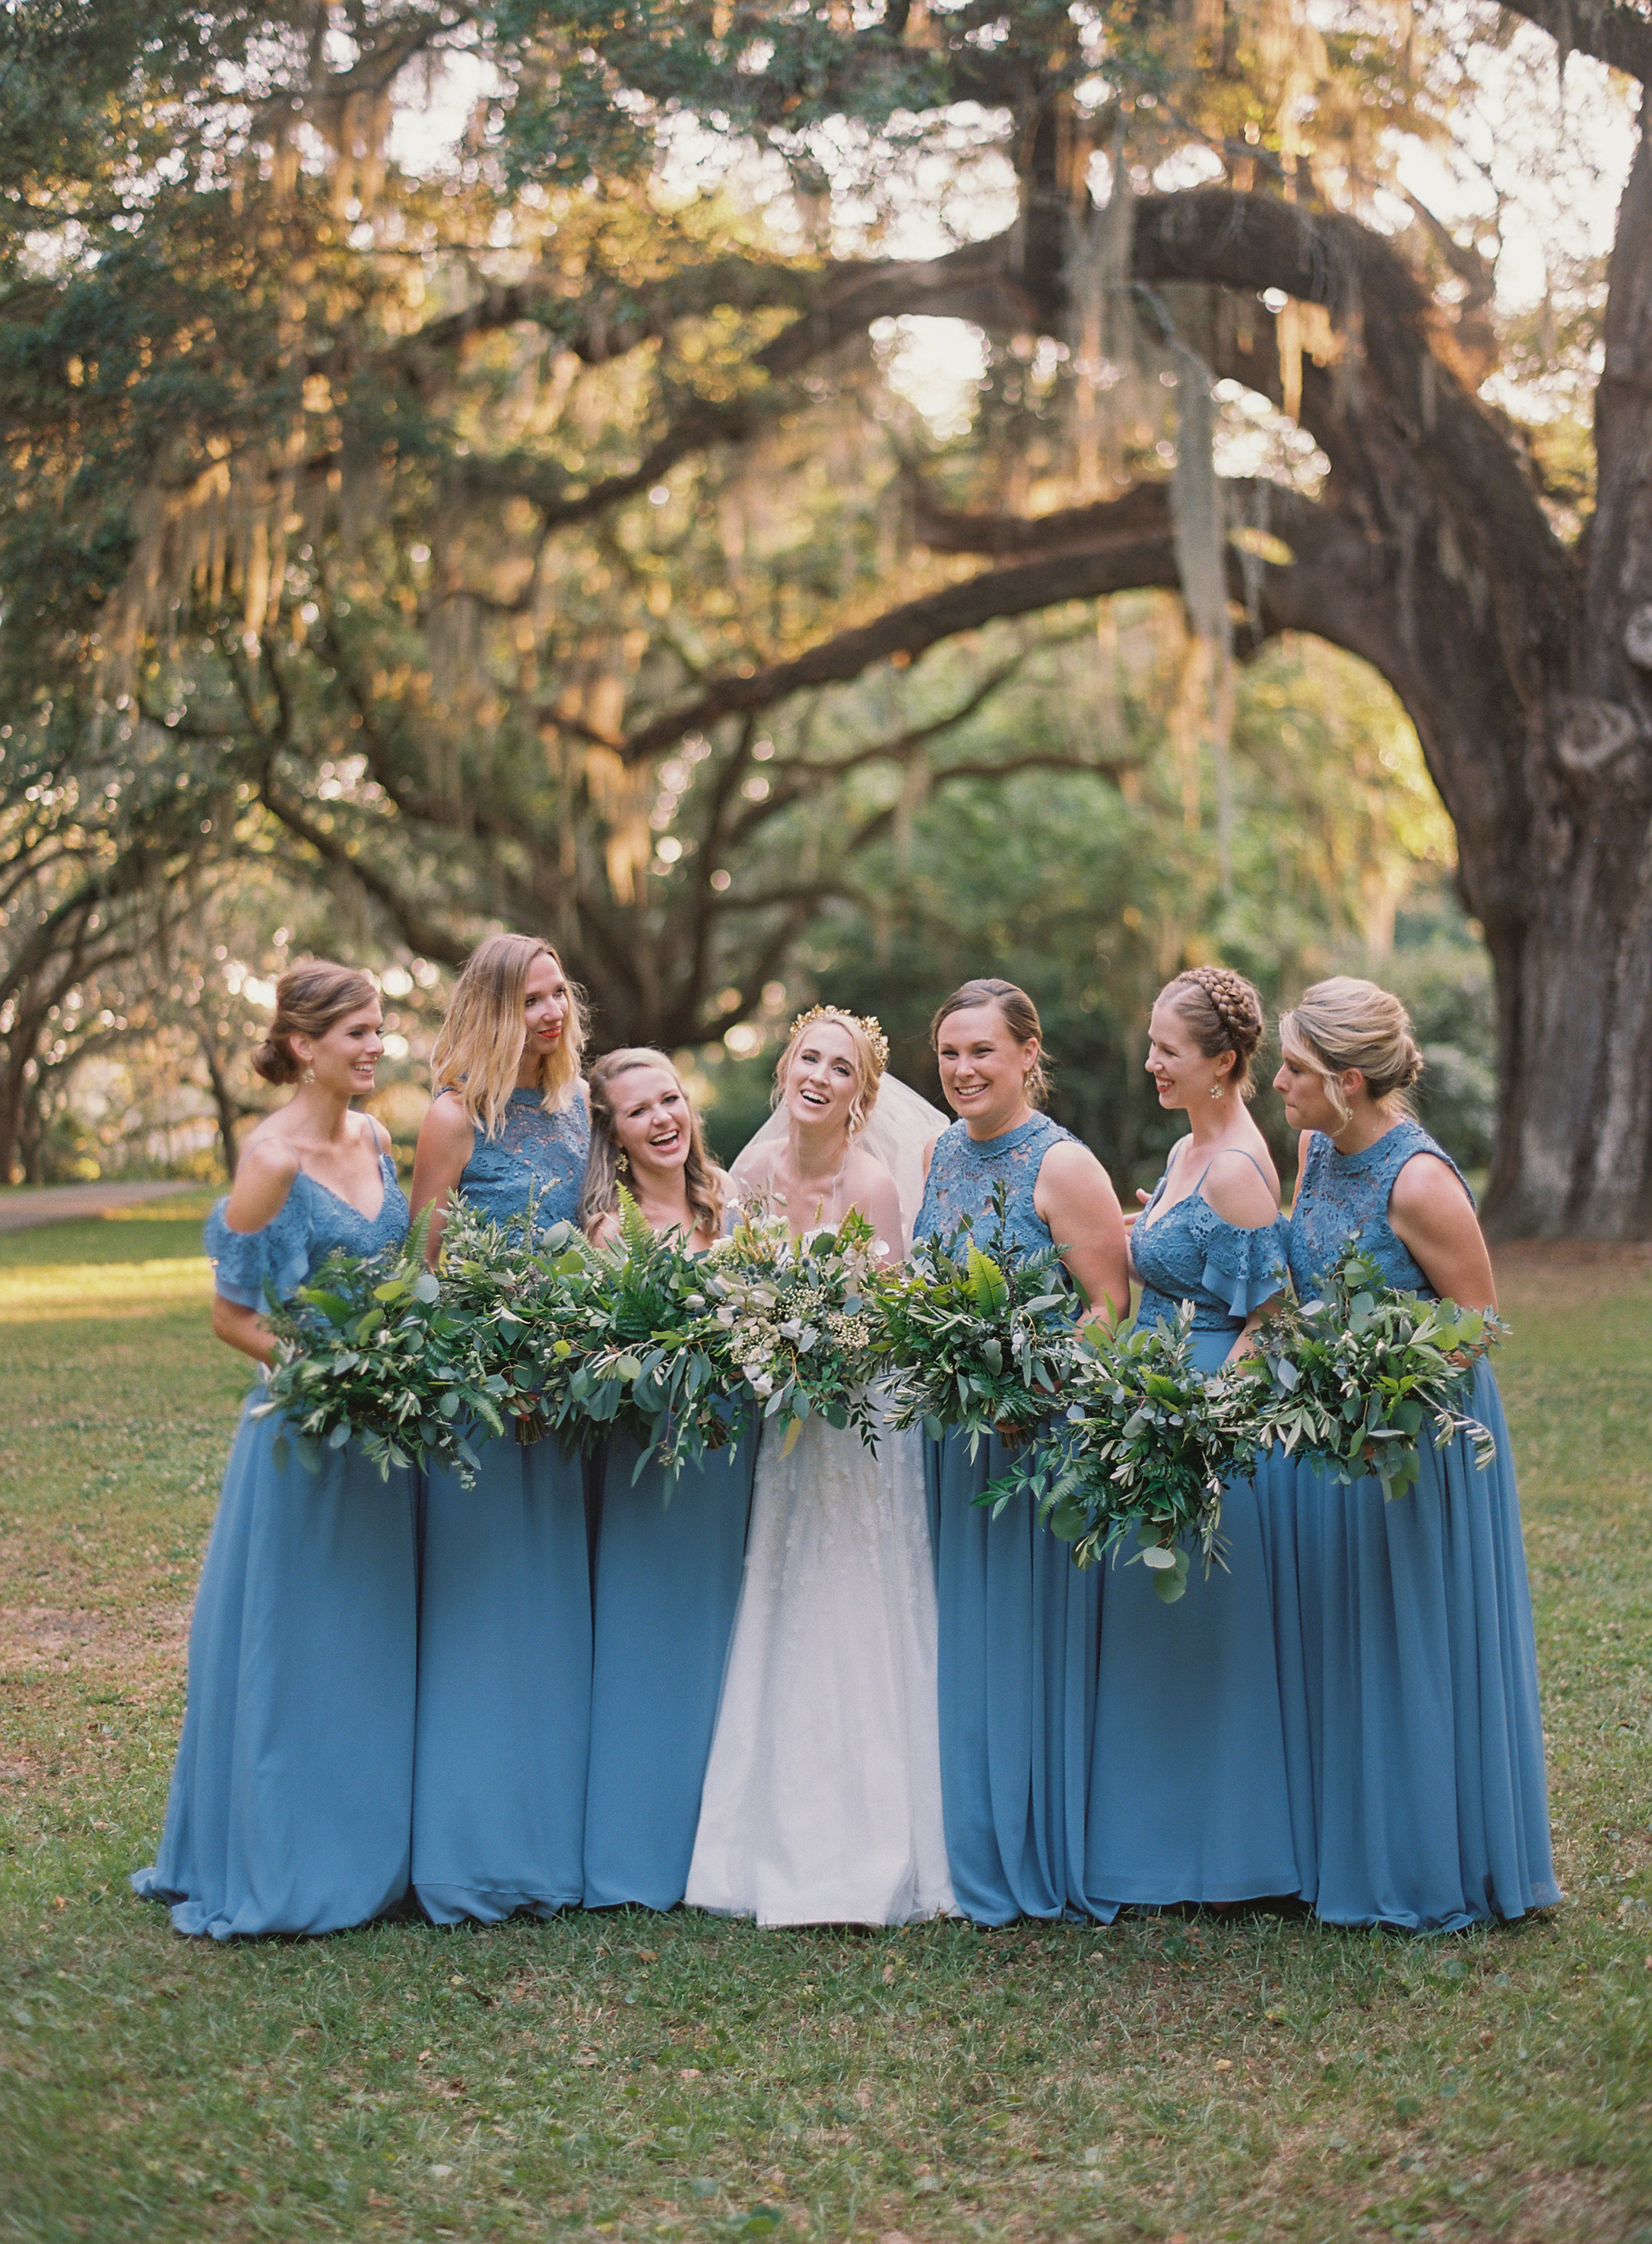 Bridesmaids wore beautiful blue gowns complemented by botanical sprays, completing the theme of French blue and greenery. Christine McFadden, Ieva Garenne, Jessica Phillips Tyson, Lauren Garenne, Mary Mac Wilson, Meredith Wallis, and Caitlyn Fowles.